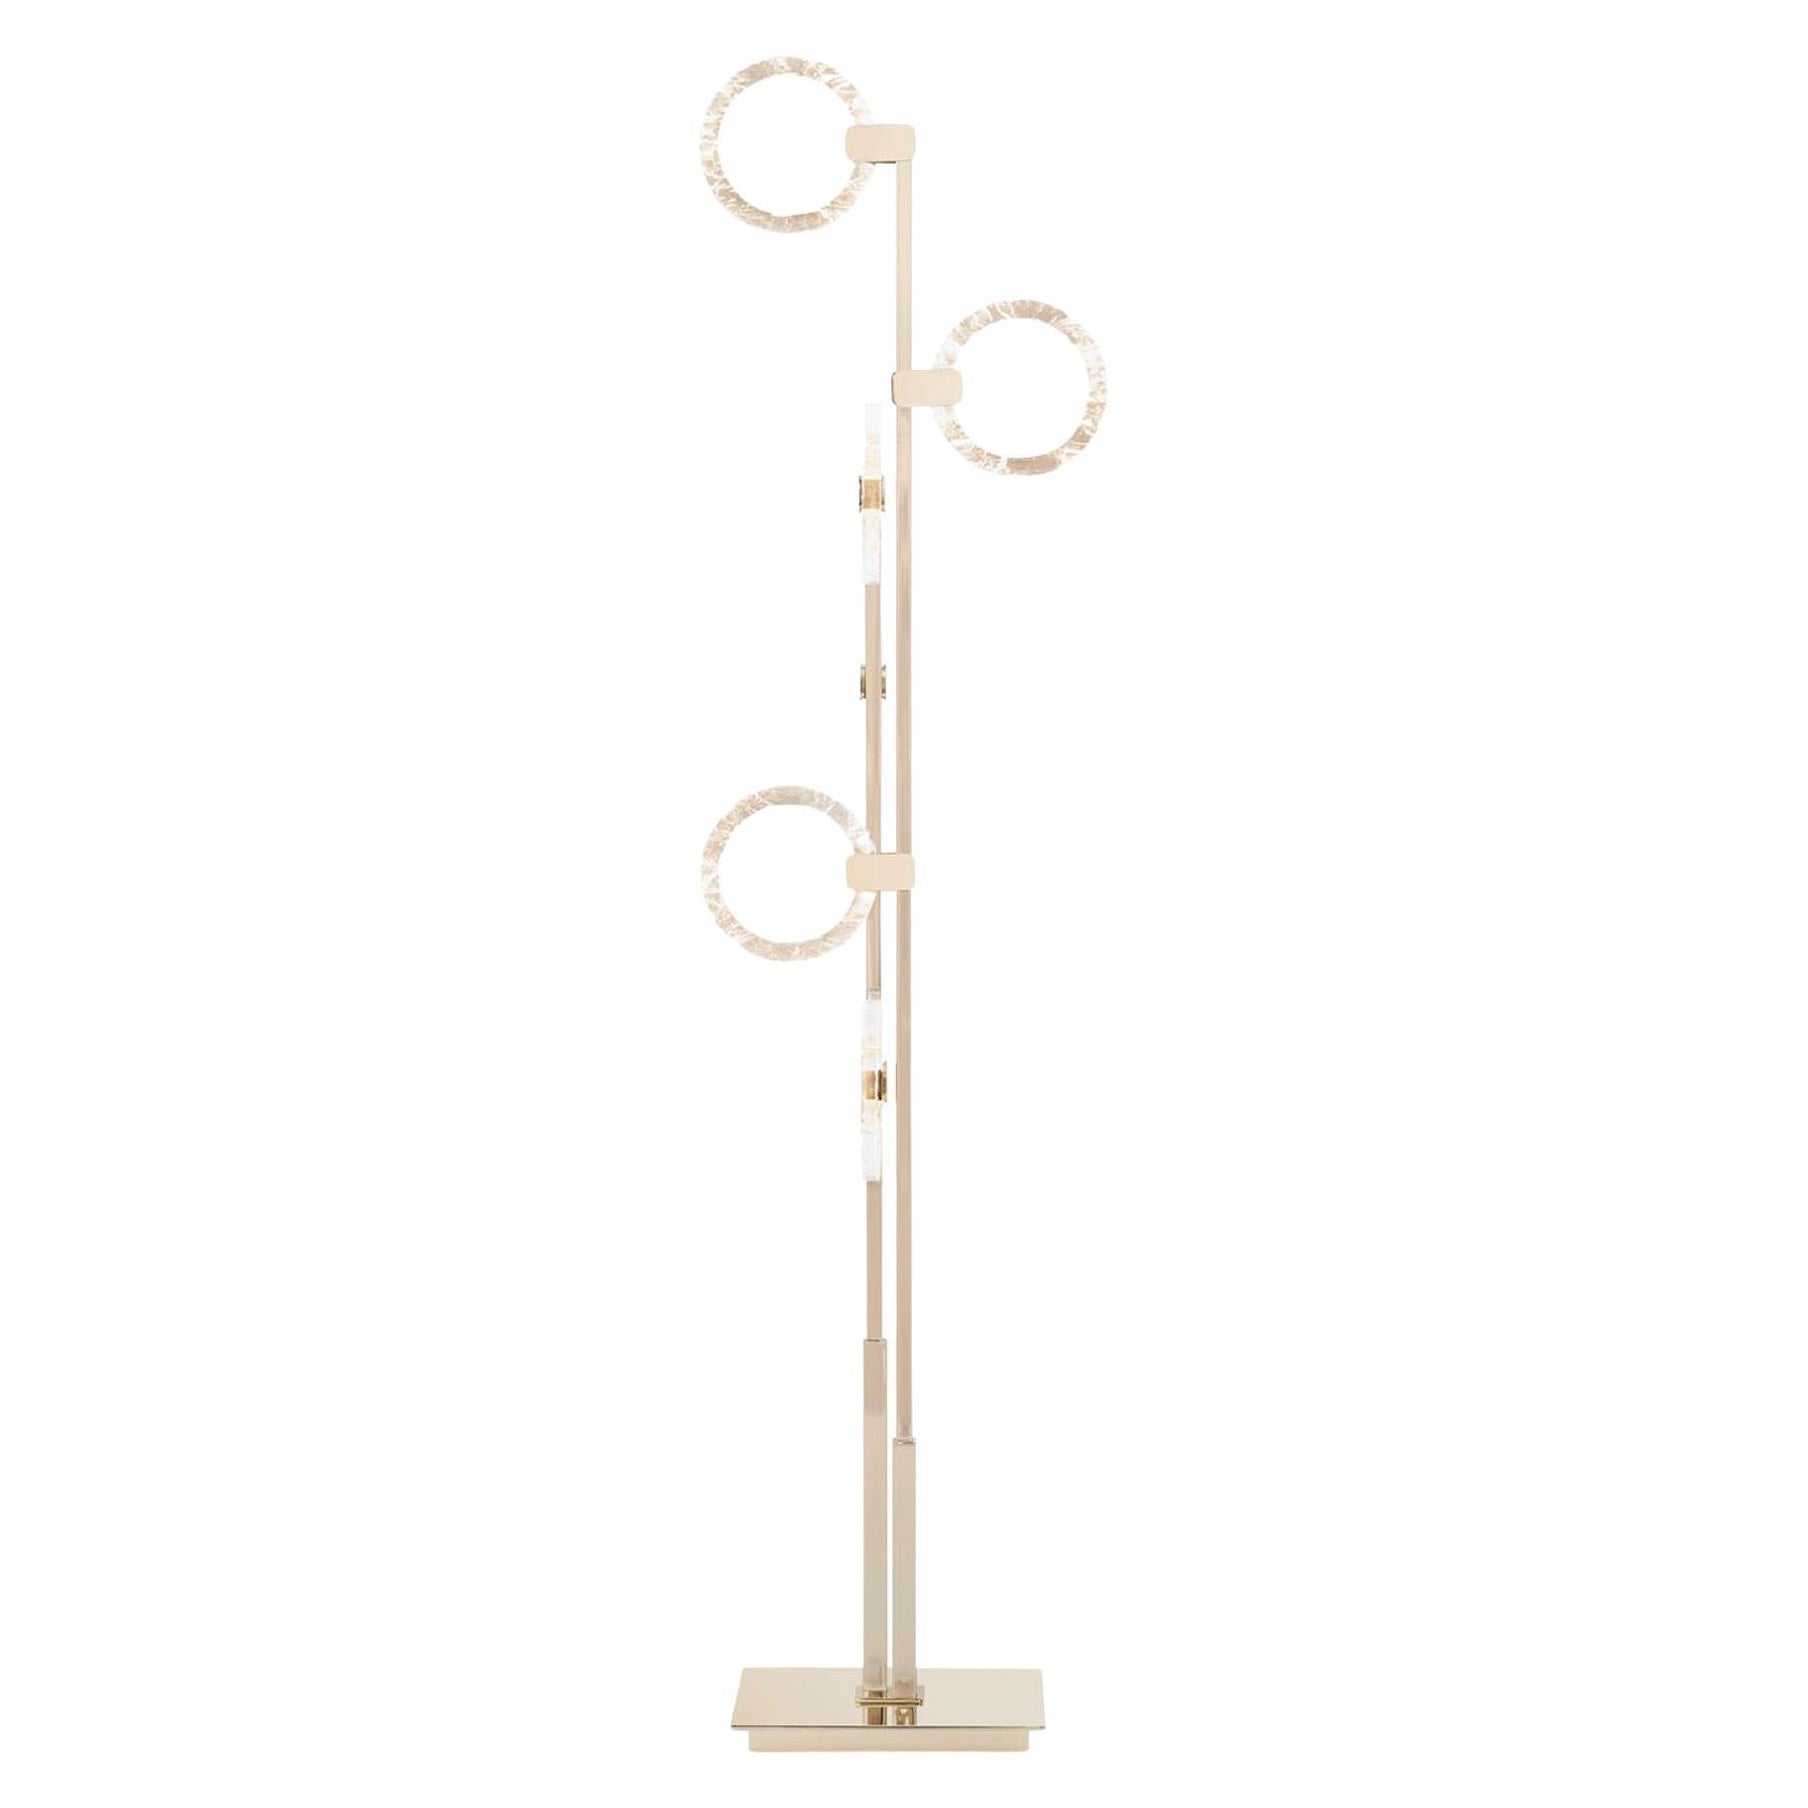 Floor Lamp Metal Structur Polished Champagne Finish Decorative Methacrylate Ring For Sale